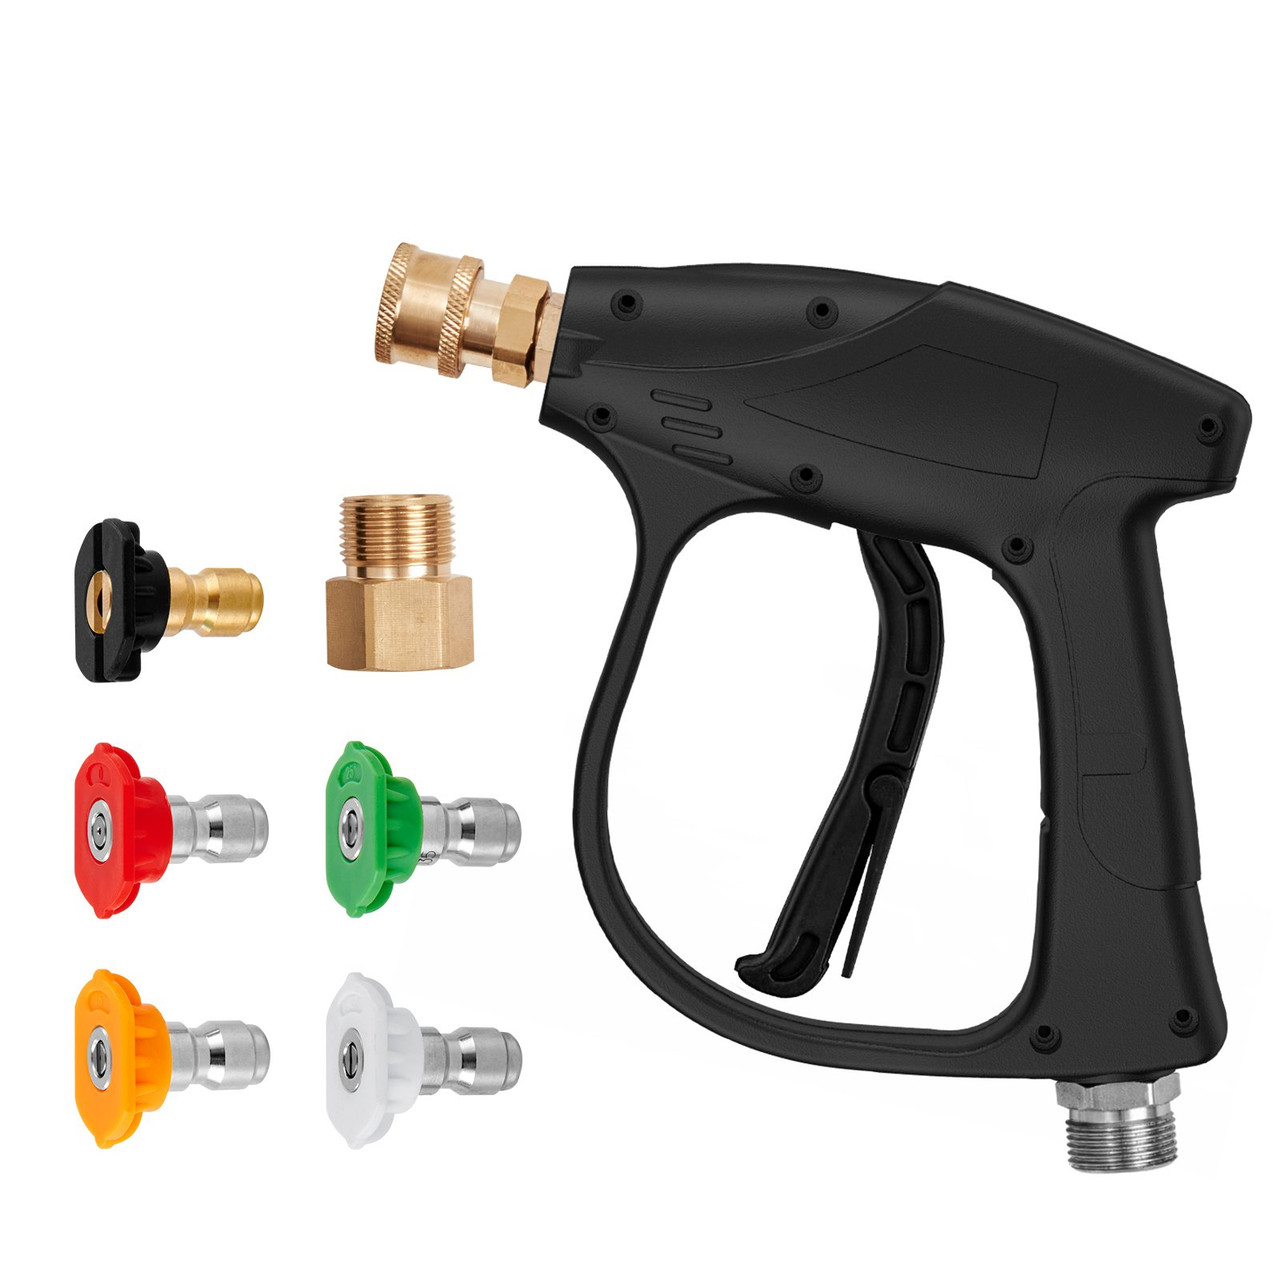 Short Pressure Washer Gun, 4350 PSI High Power Washer Spay Gun, M22-14 Inlet & 1/4'' Outlet Hose Connector Foam Gun, Stainless Steel Pressure Washer Handle with 5 Color Quick Connect Nozzles